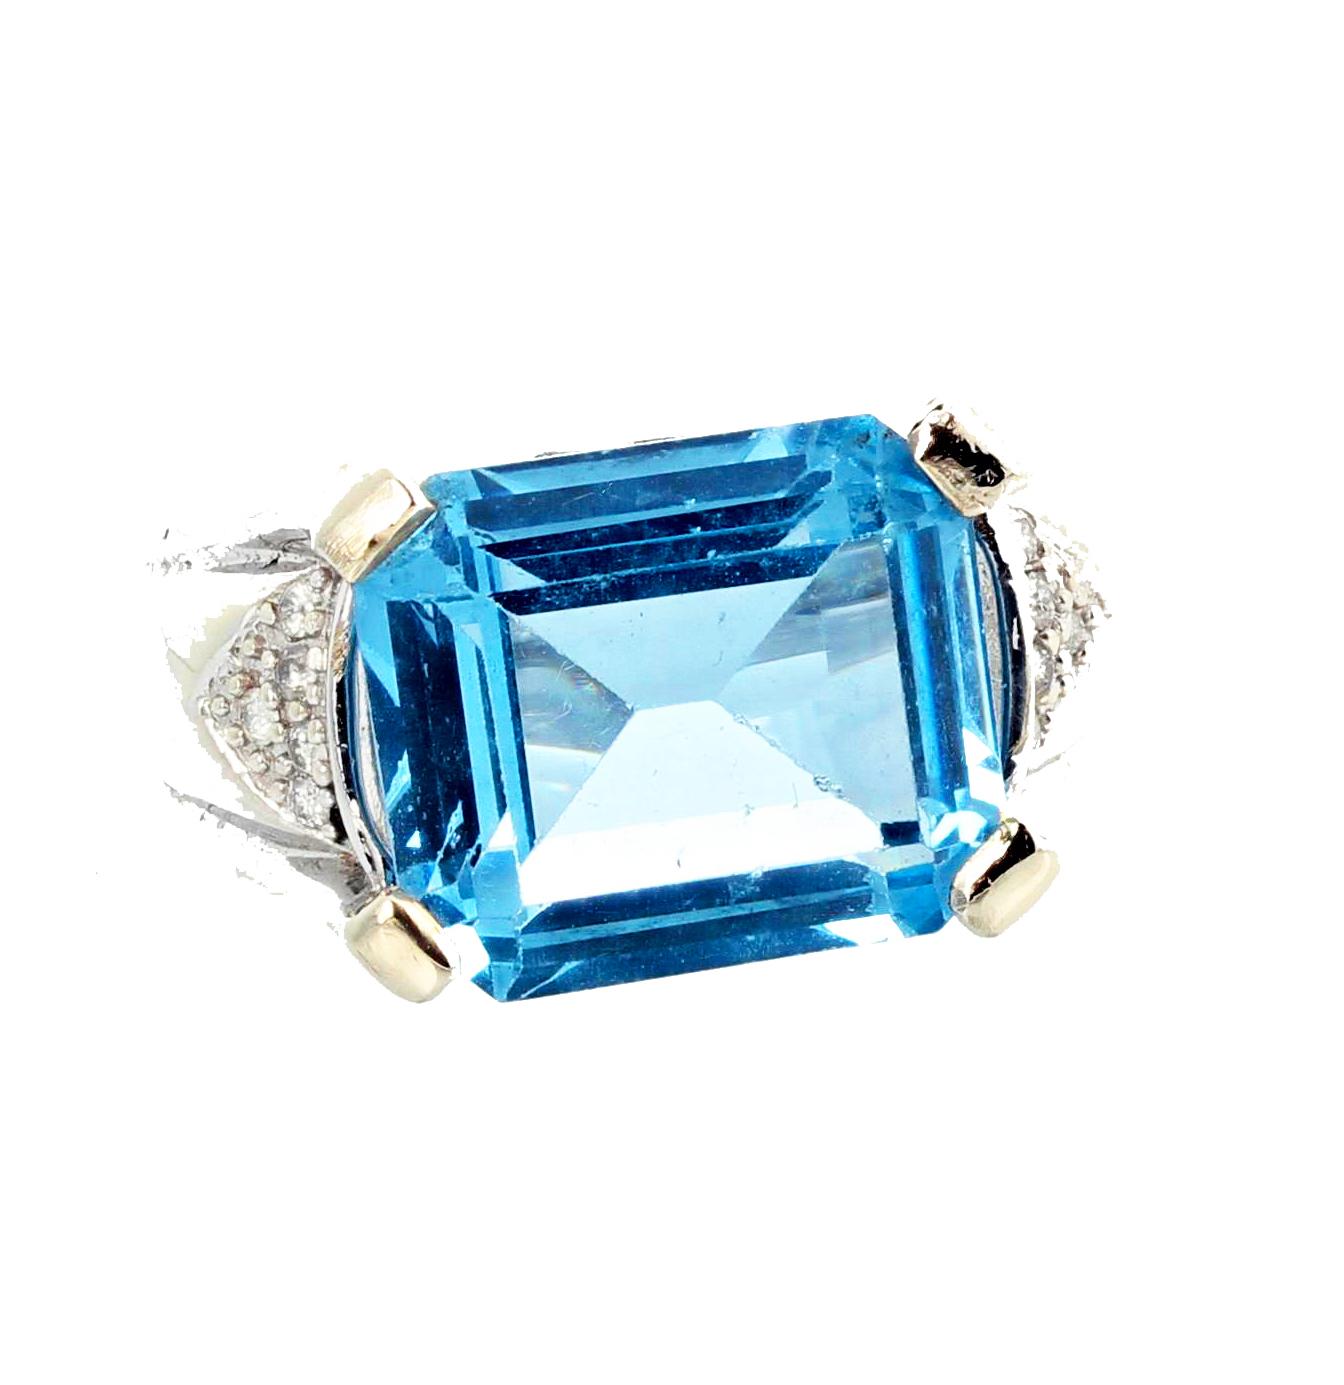 Glittering brilliant emerald cut huge Brasilian 9 Carat blue Topaz - 14.2 mm x 12 mm - enhanced with teeny tiny sparkling little Diamonds in this 10 Kt white gold ring size 7 sizable FOR FREE.  This is wonderful for day to evening fun.  